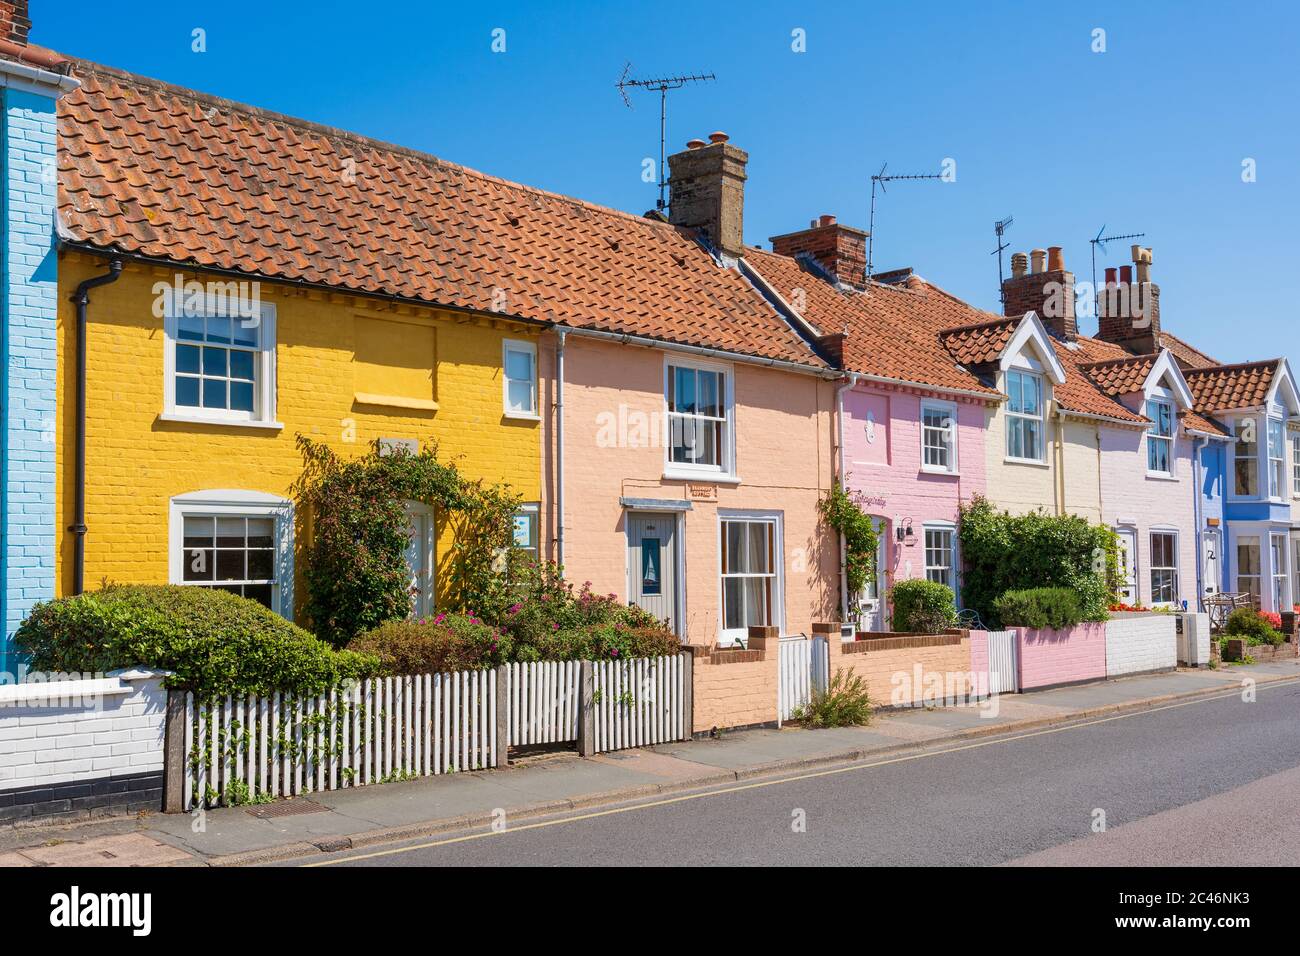 Row of colourful houses in Aldeburgh High St, Aldeburgh, Suffolk. UK Stock Photo